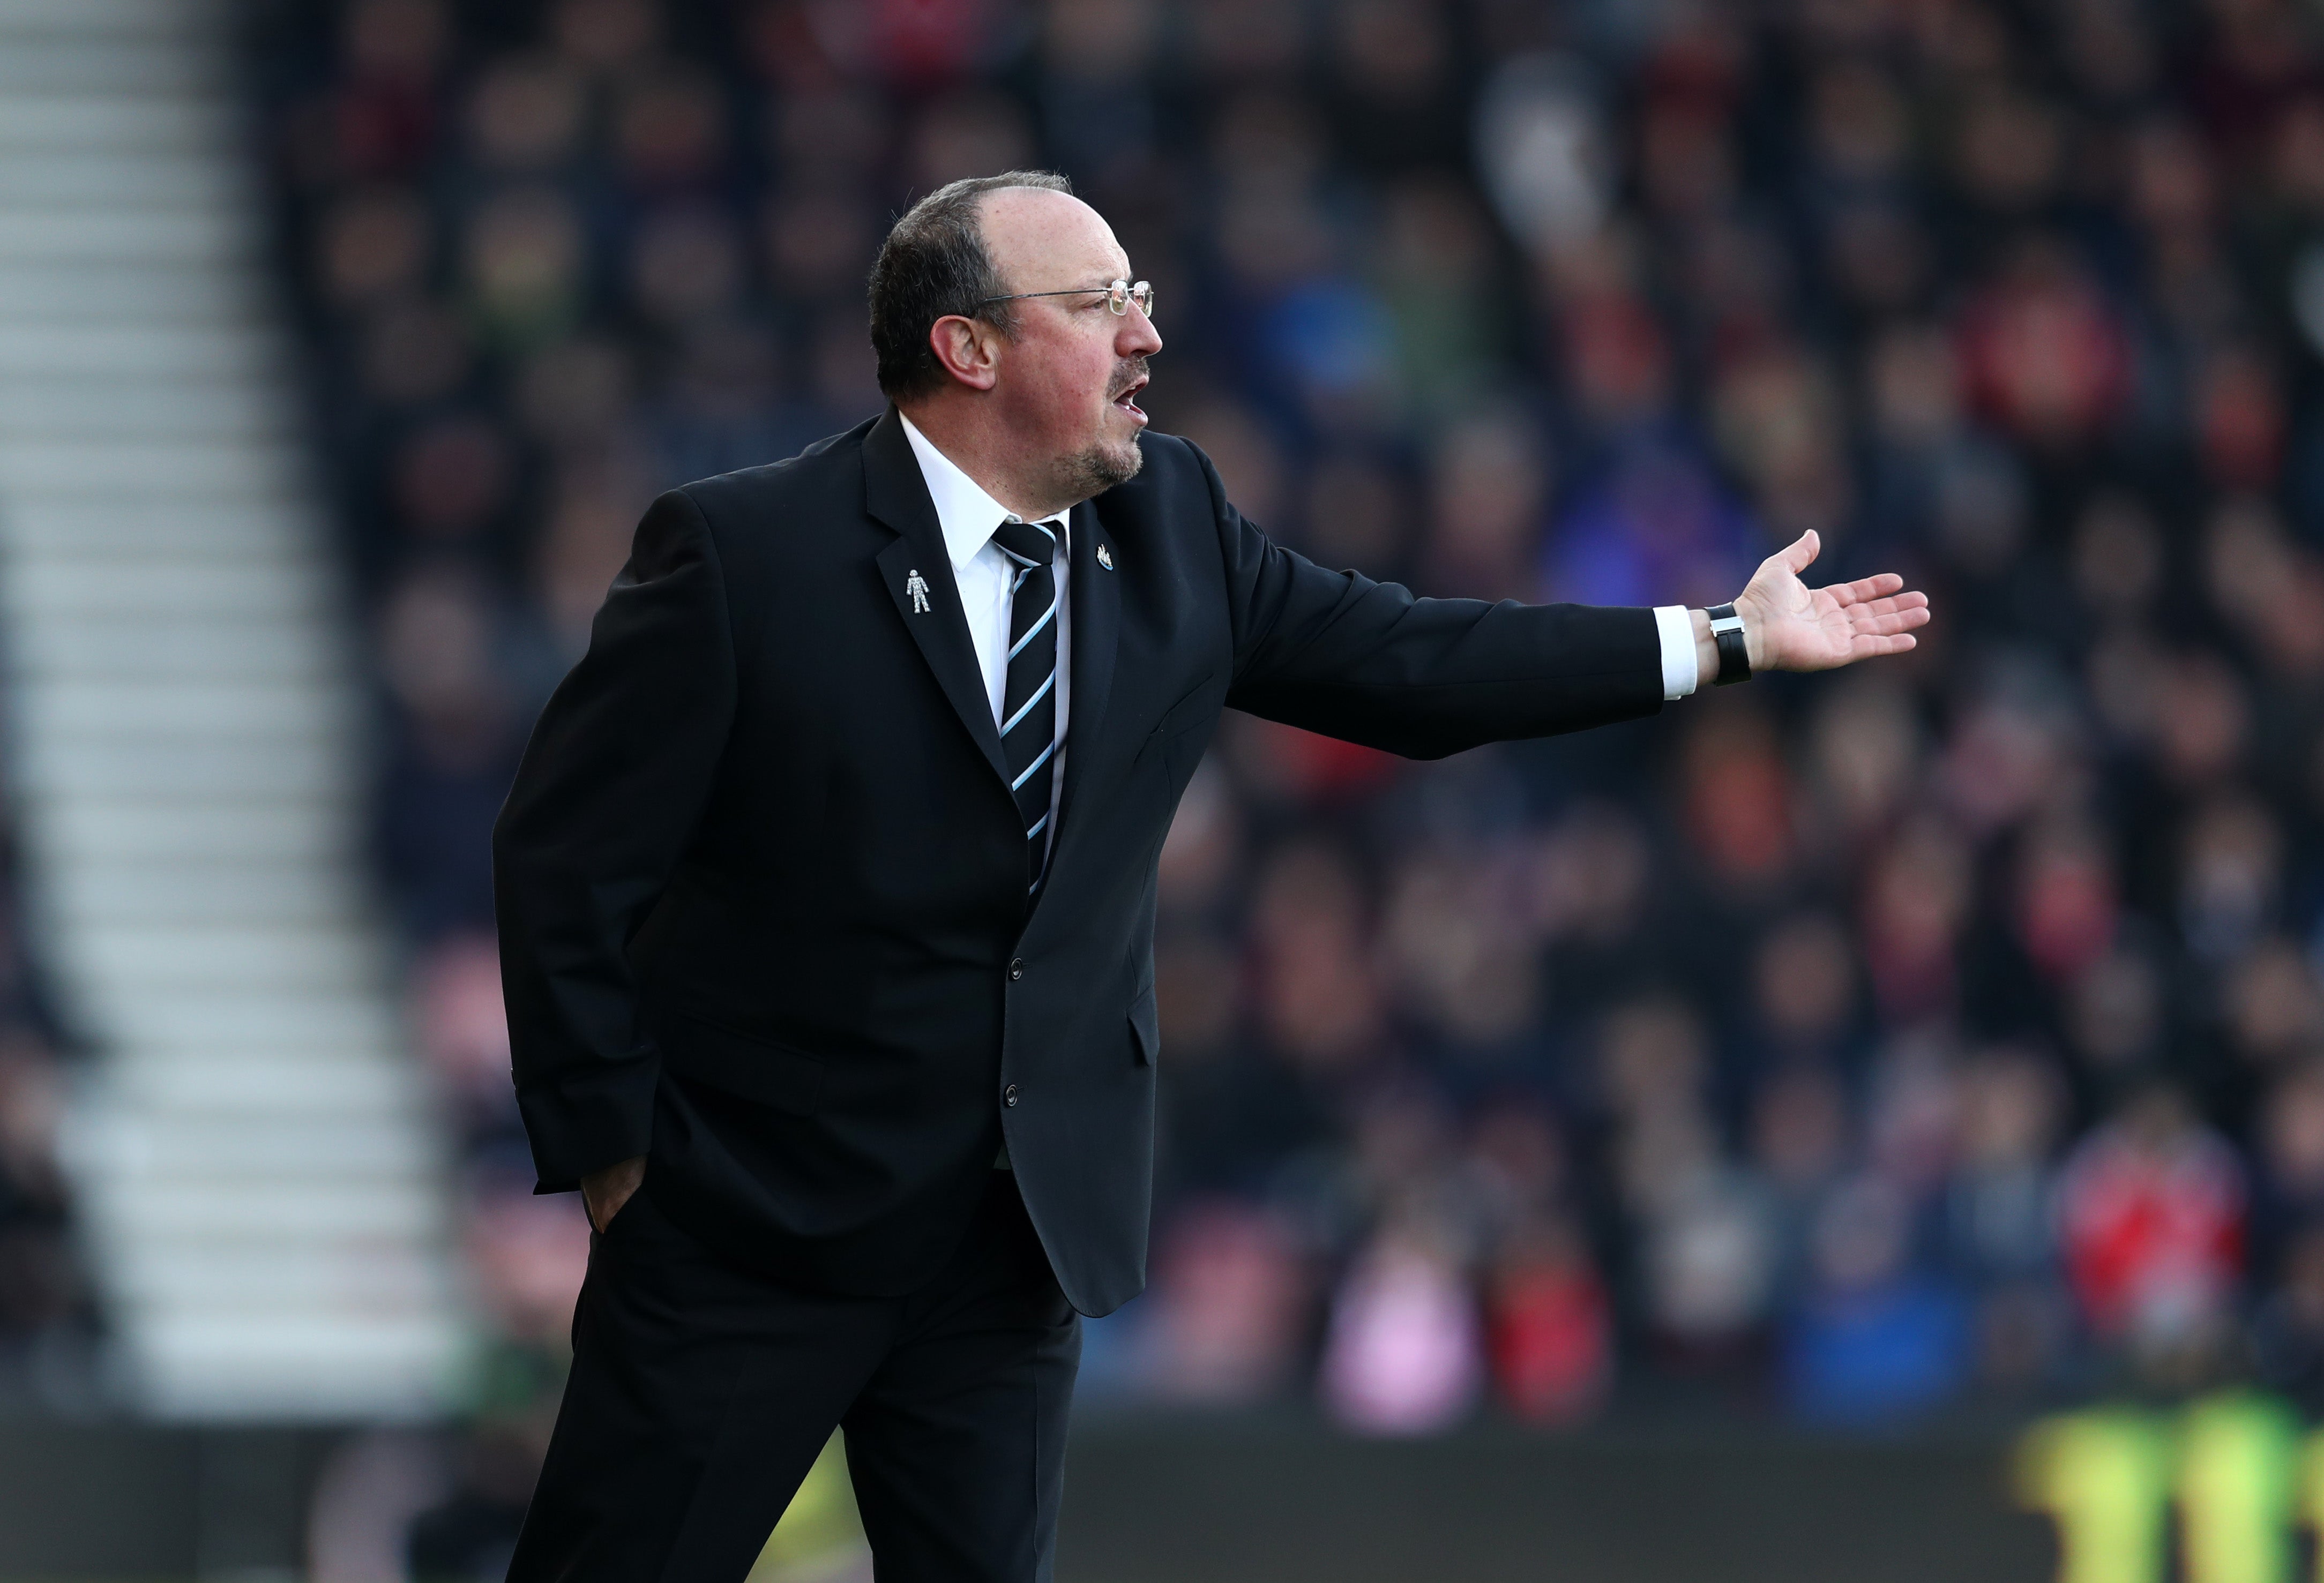 Benitez is rumoured to take Spurs’ manager role